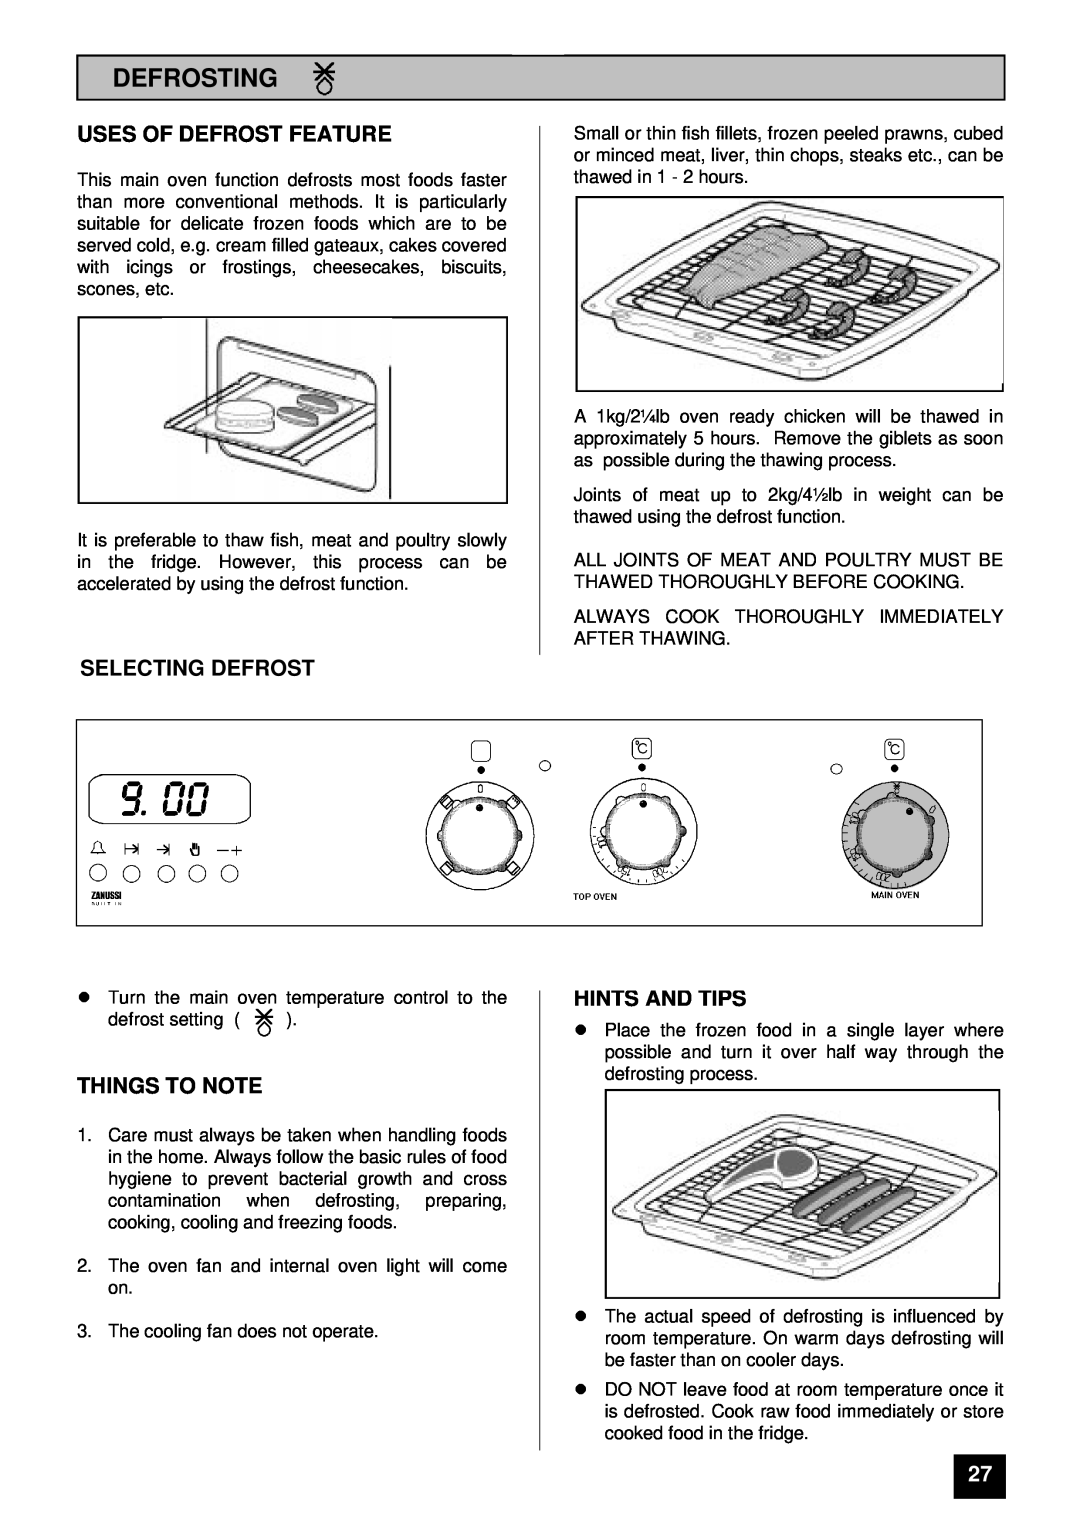 Zanussi ZDF867X manual Defrosting, Uses Of Defrost Feature, Selecting Defrost, Things To Note, Hints And Tips 